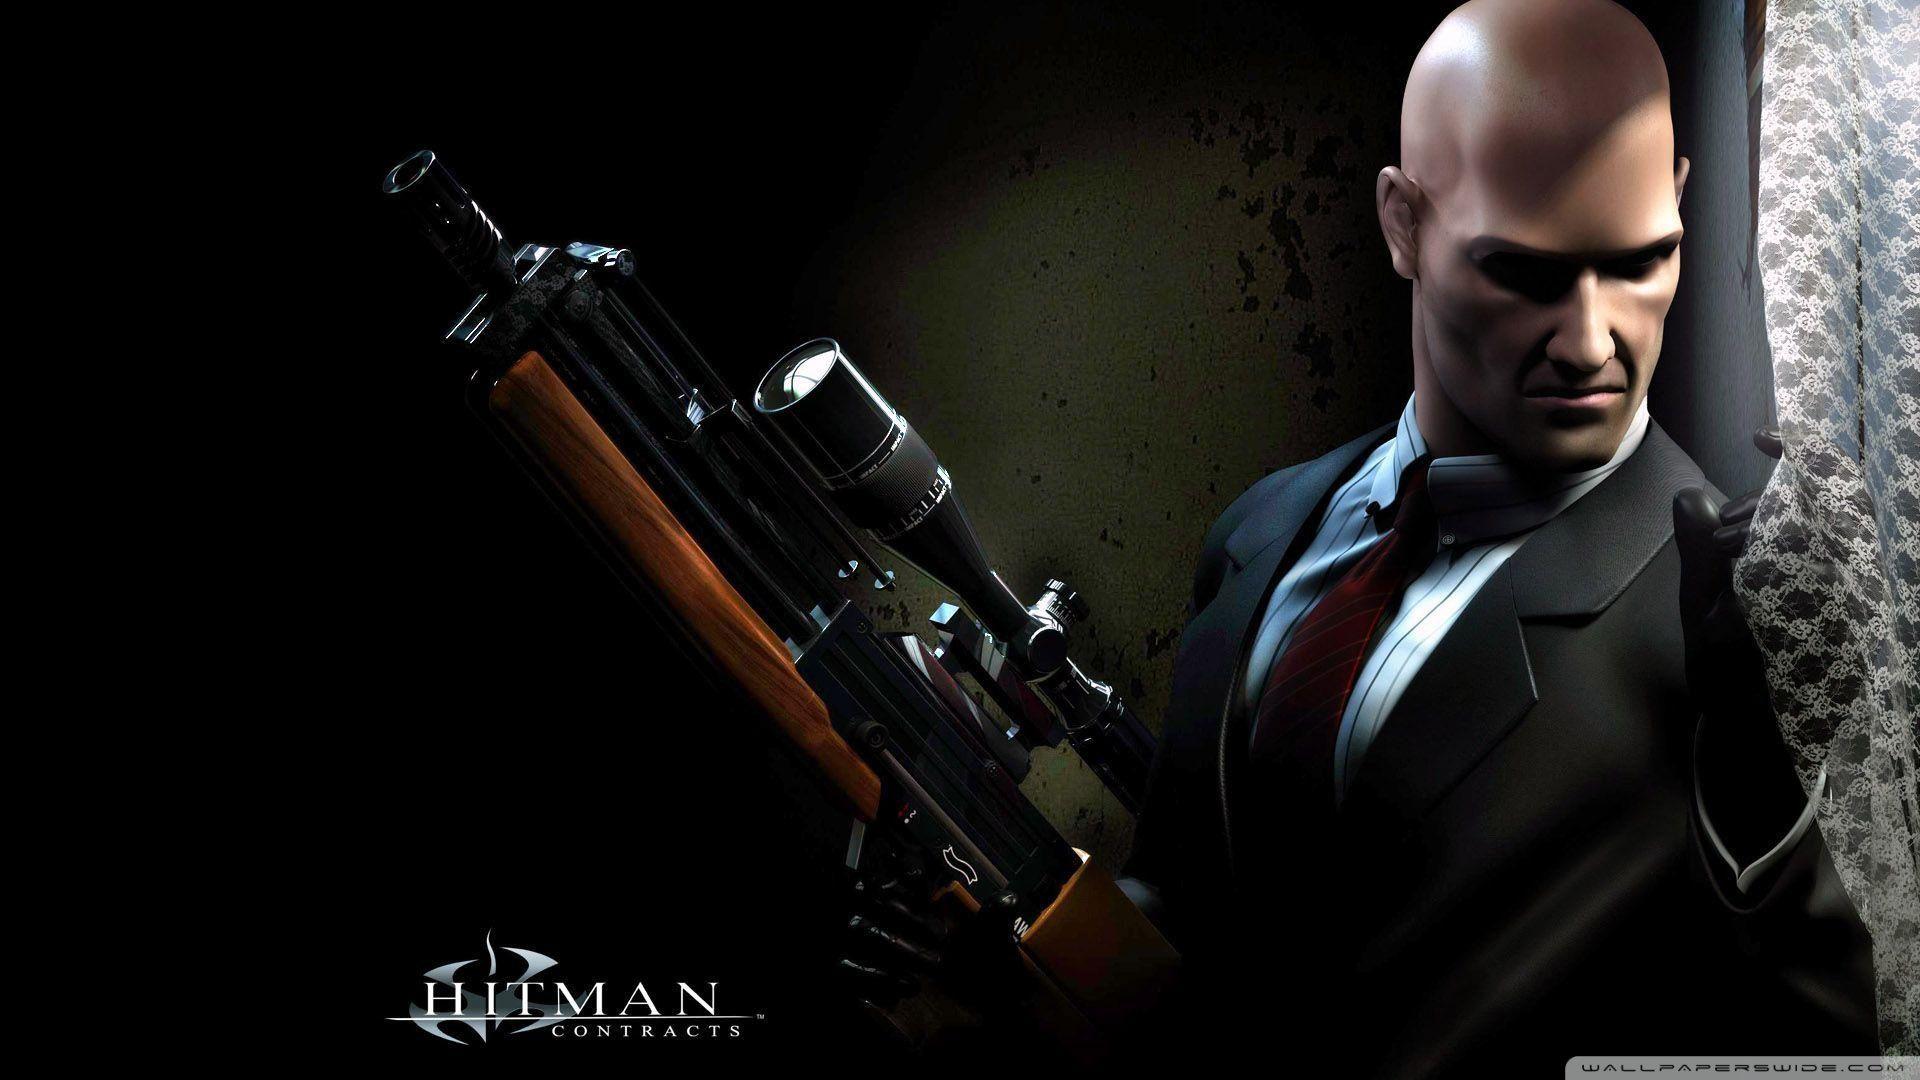 Hitman Phone Wallpapers  Top Free Hitman Phone Backgrounds   WallpaperAccess  Hitman Best iphone wallpapers Android wallpaper